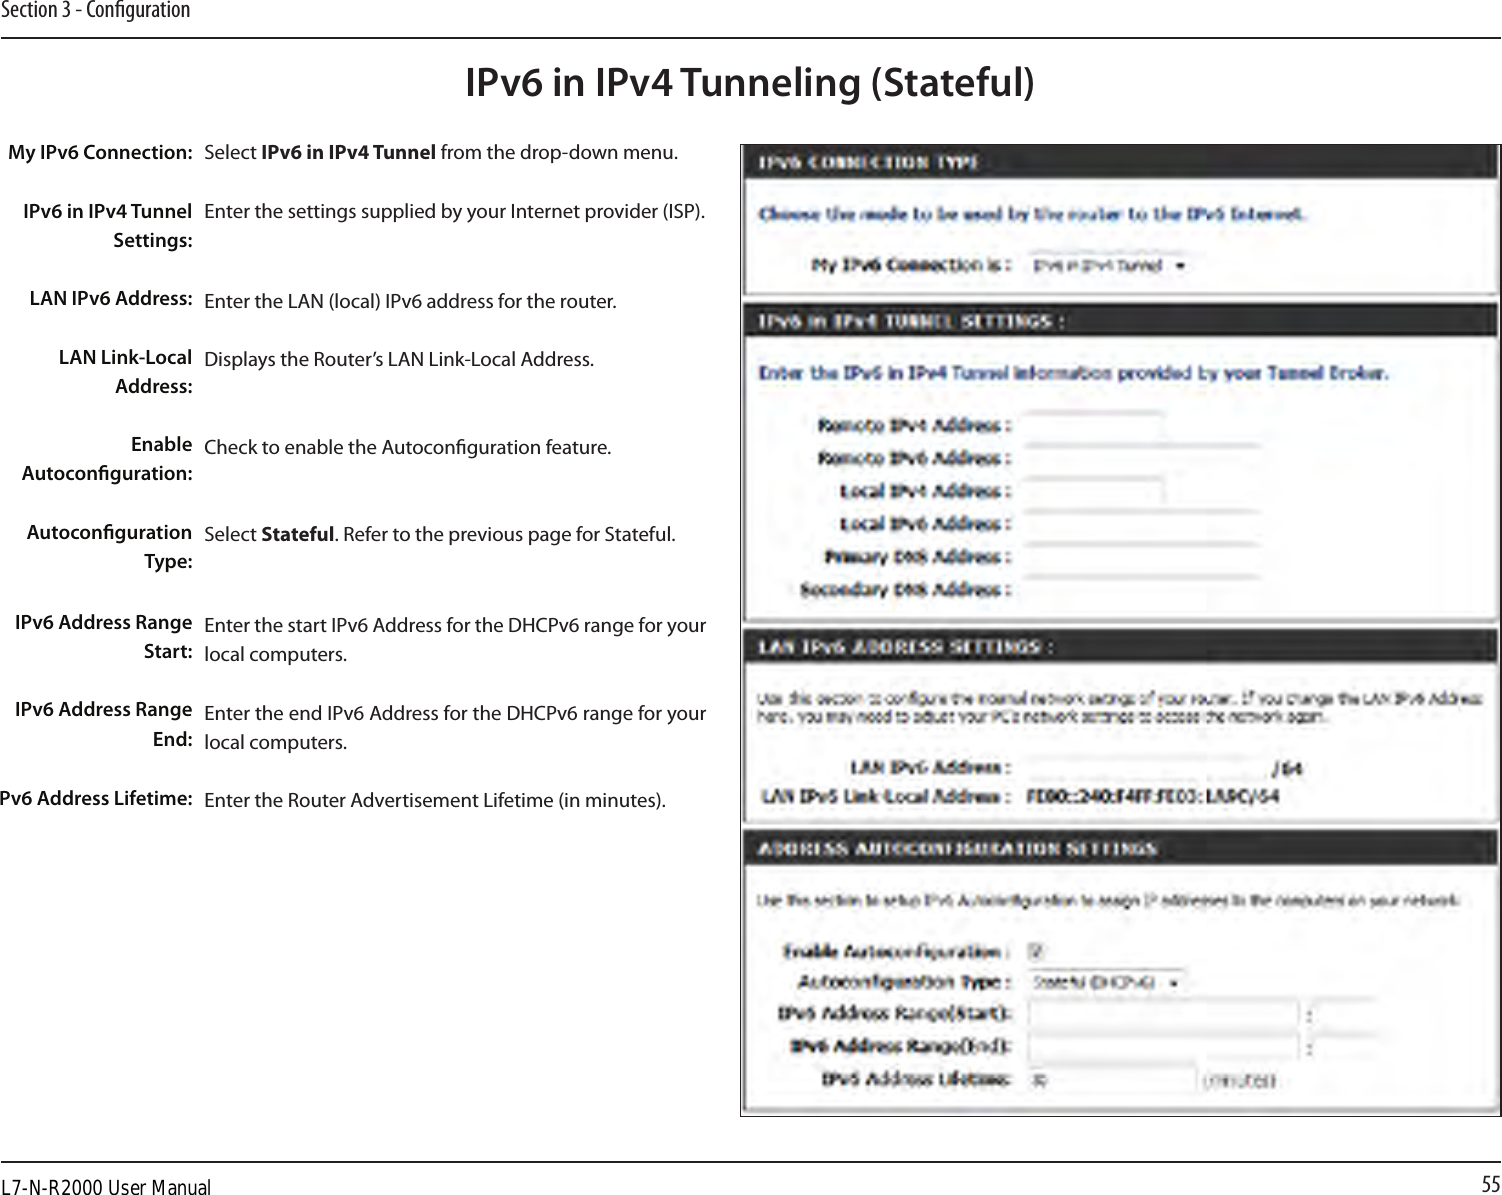 55Section 3 - CongurationIPv6 in IPv4 Tunneling (Stateful)Select IPv6 in IPv4 Tunnel from the drop-down menu.Enter the settings supplied by your Internet provider (ISP). Enter the LAN (local) IPv6 address for the router. Displays the Router’s LAN Link-Local Address.Check to enable the Autoconguration feature.Select Stateful. Refer to the previous page for Stateful.Enter the start IPv6 Address for the DHCPv6 range for your local computers.Enter the end IPv6 Address for the DHCPv6 range for your local computers.Enter the Router Advertisement Lifetime (in minutes).My IPv6 Connection:IPv6 in IPv4 Tunnel Settings:LAN IPv6 Address:LAN Link-Local Address:Enable Autoconguration:Autoconguration Type:IPv6 Address Range Start:IPv6 Address Range End:Pv6 Address Lifetime:L7-N-R2000 User Manual